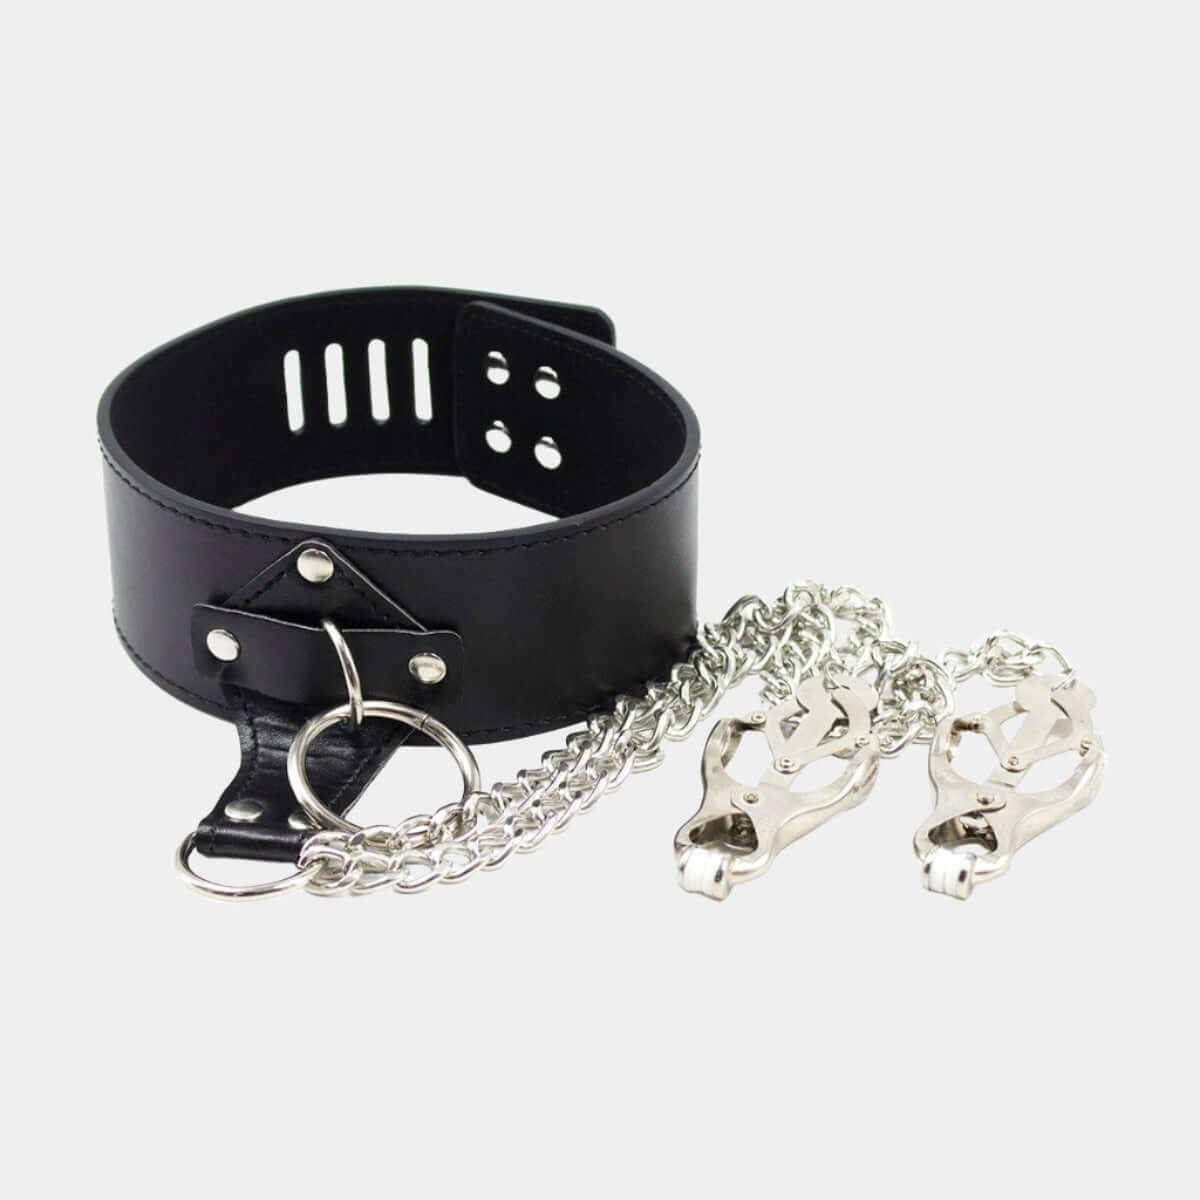 Clover Clamps with Leather Collar